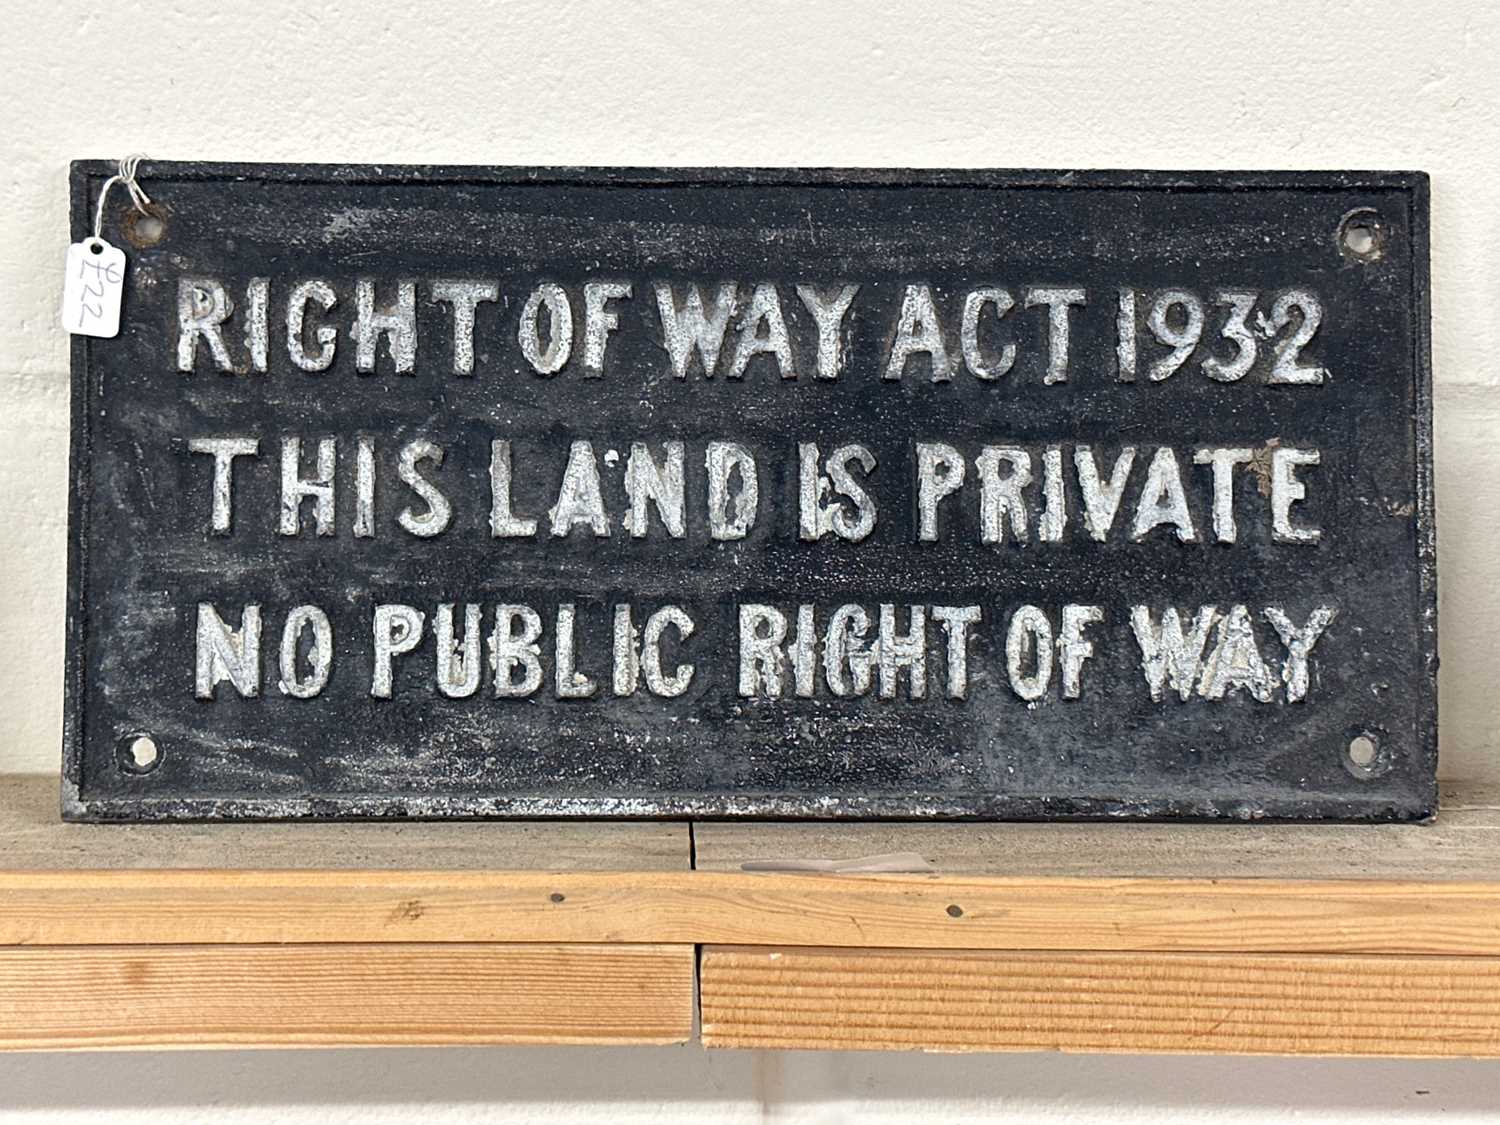 Lot 32 - Cast informational sign "Right of Way Act 1932"